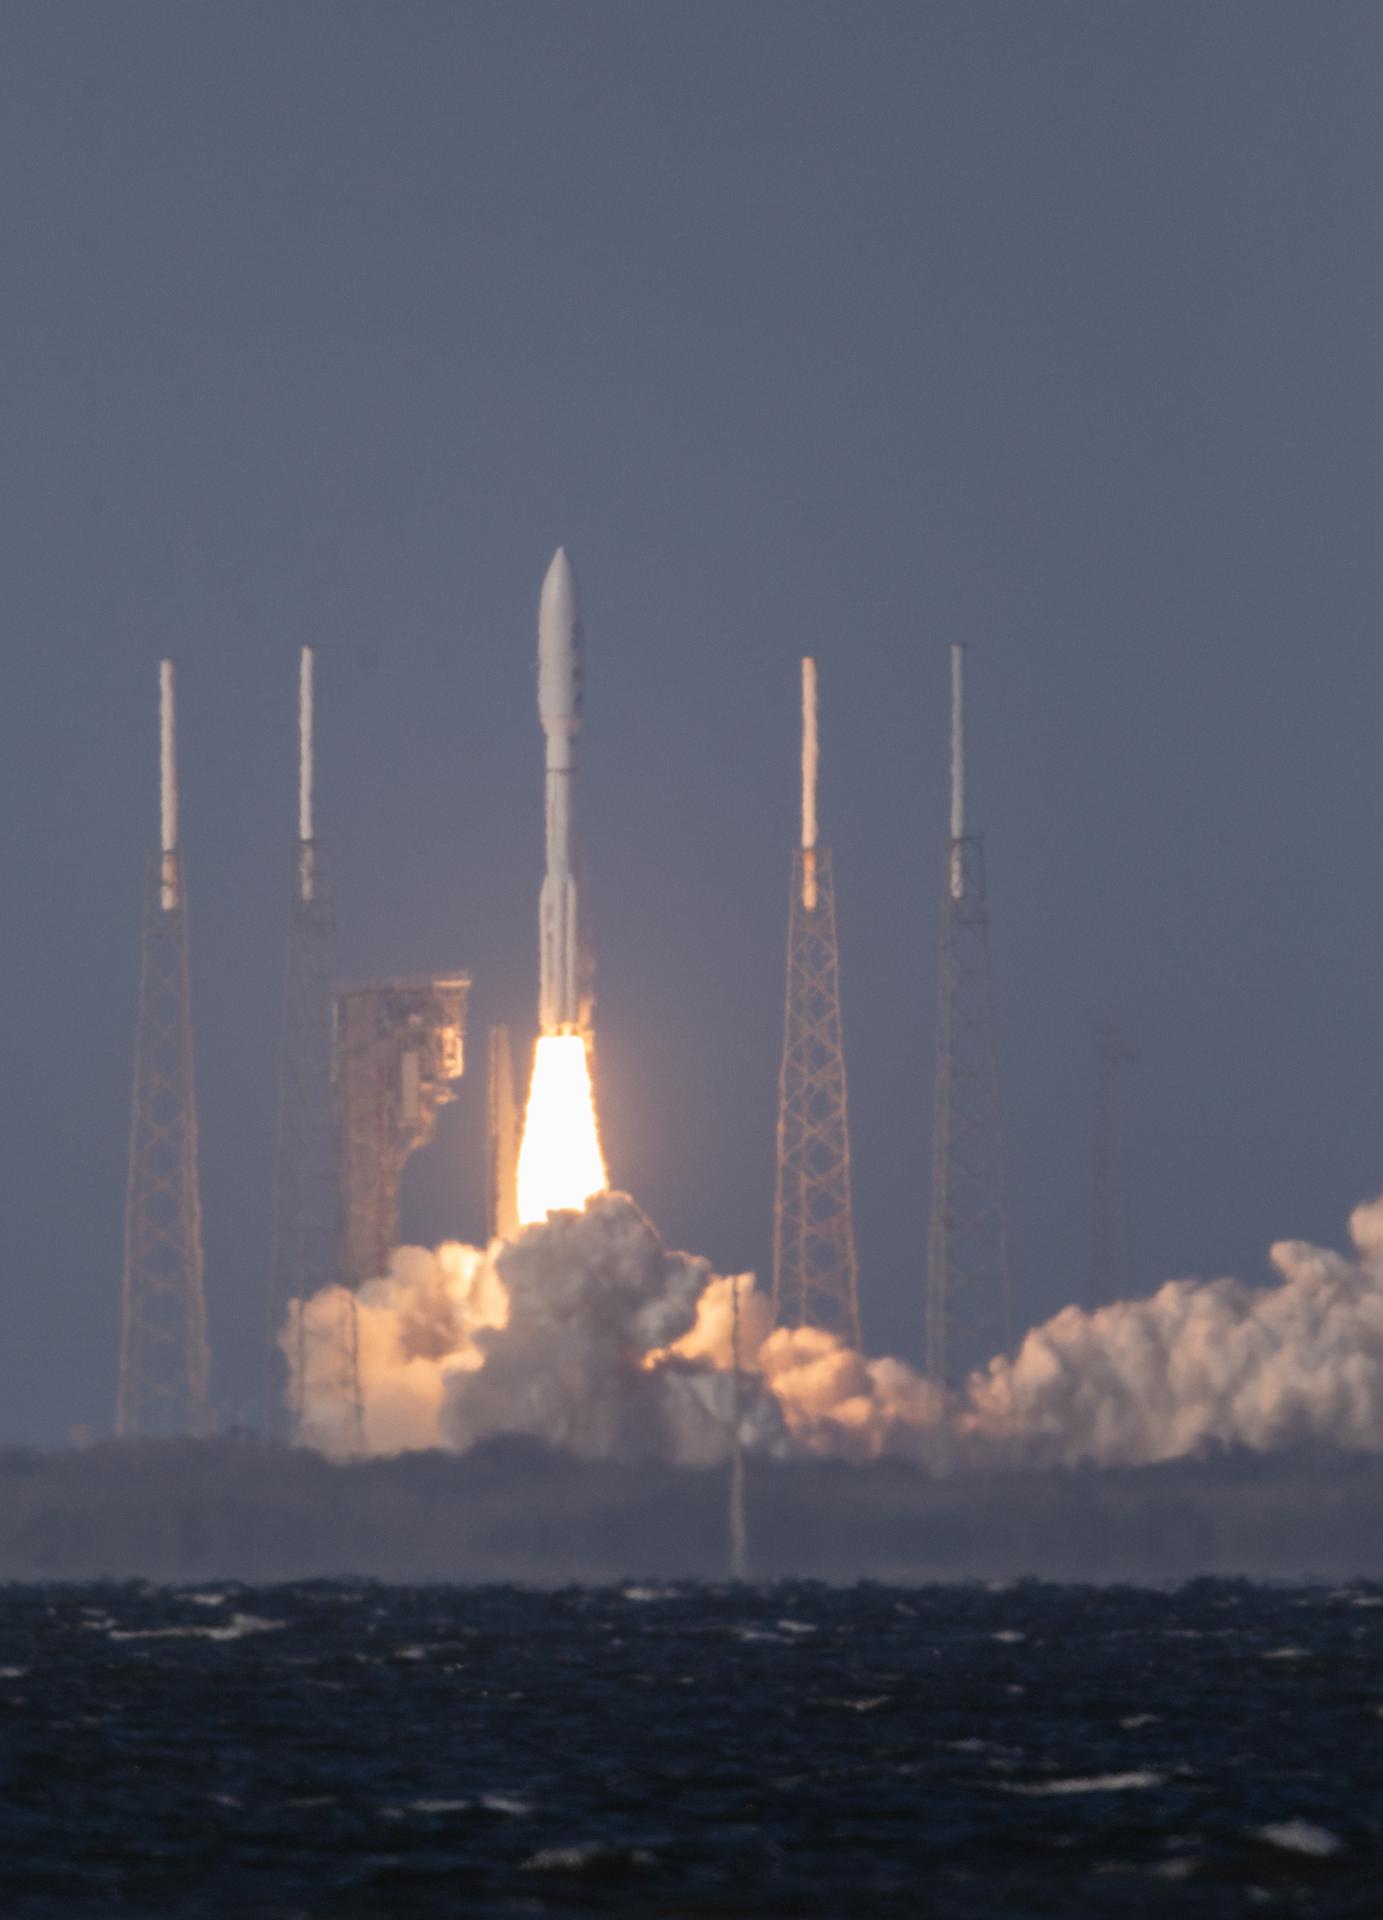 A United Launch Alliance Atlas V 541 rocket, carrying the National Oceanic and Atmospheric Administration’s (NOAA) Geostationary Operational Environmental Satellite-T (GOES-T), lifts off